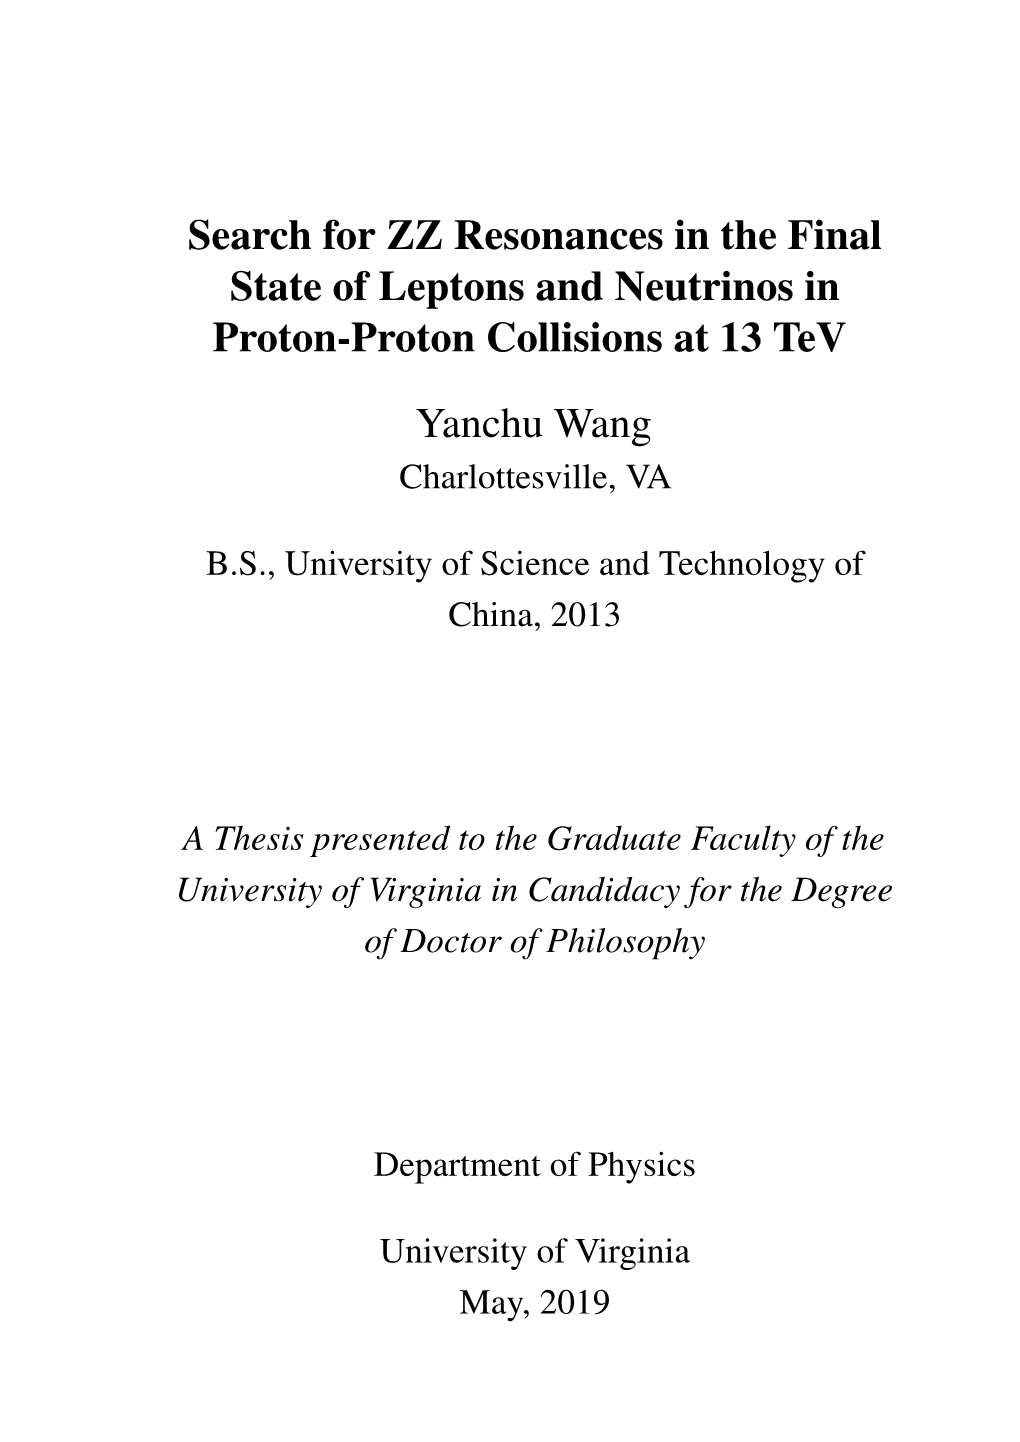 Search for ZZ Resonances in the Final State of Leptons and Neutrinos in Proton-Proton Collisions at 13 Tev Yanchu Wang Charlottesville, VA